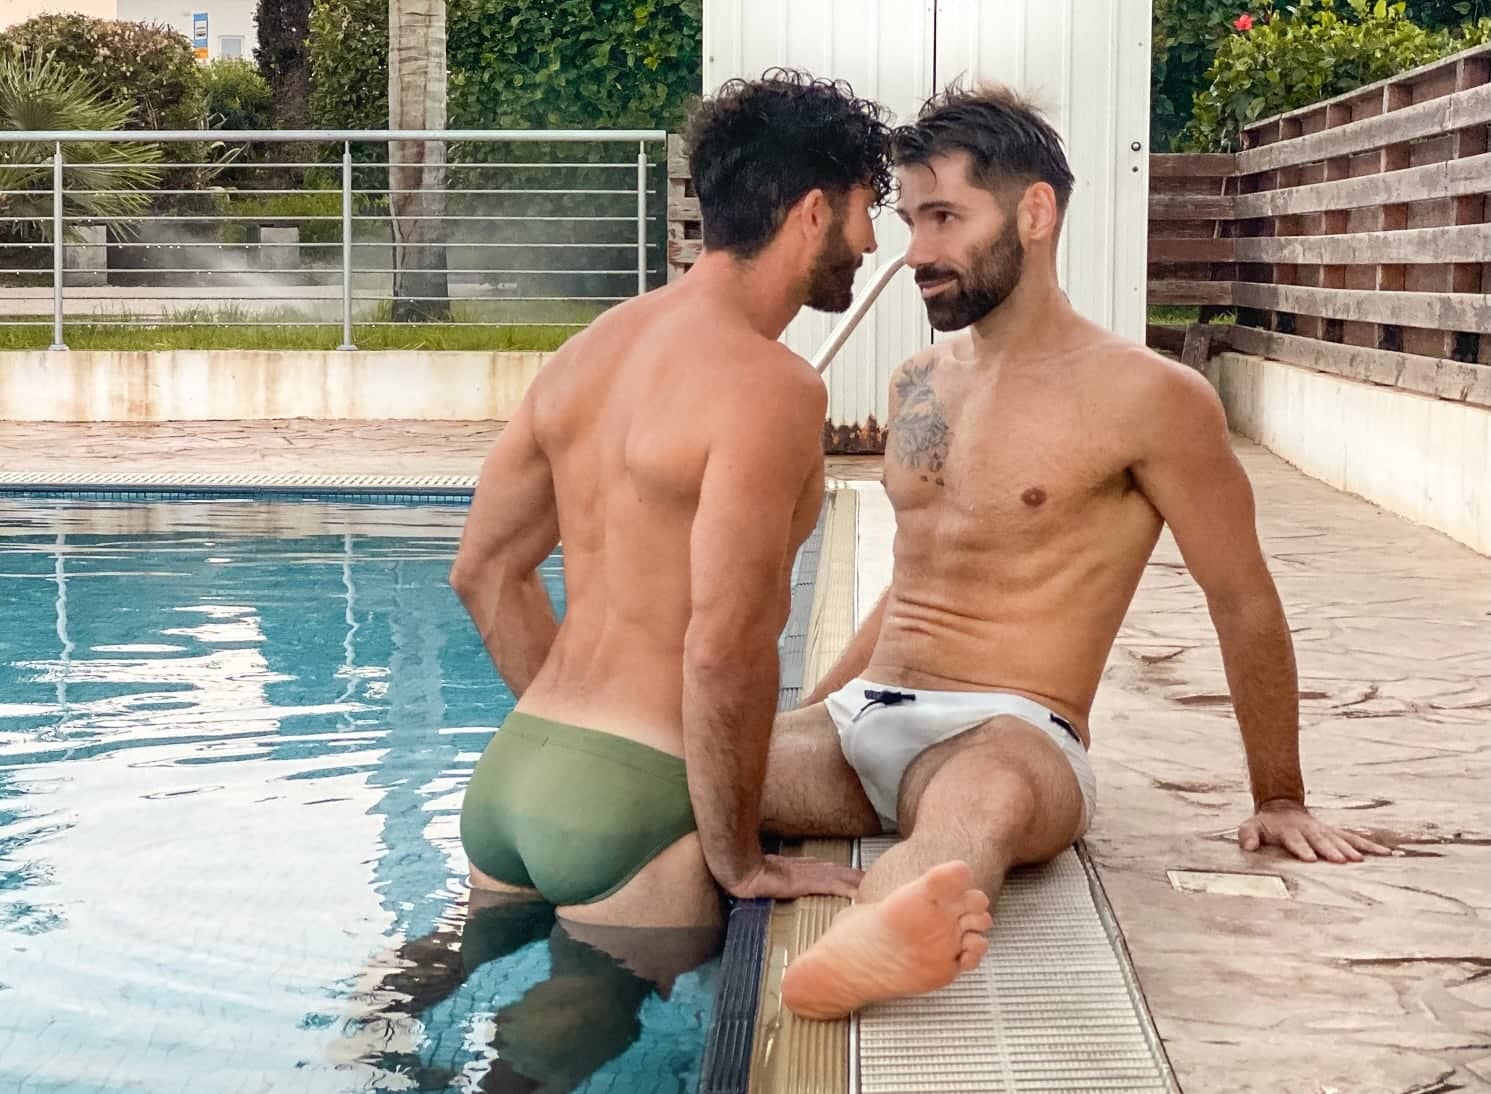 Gay couple in Speedos by pool